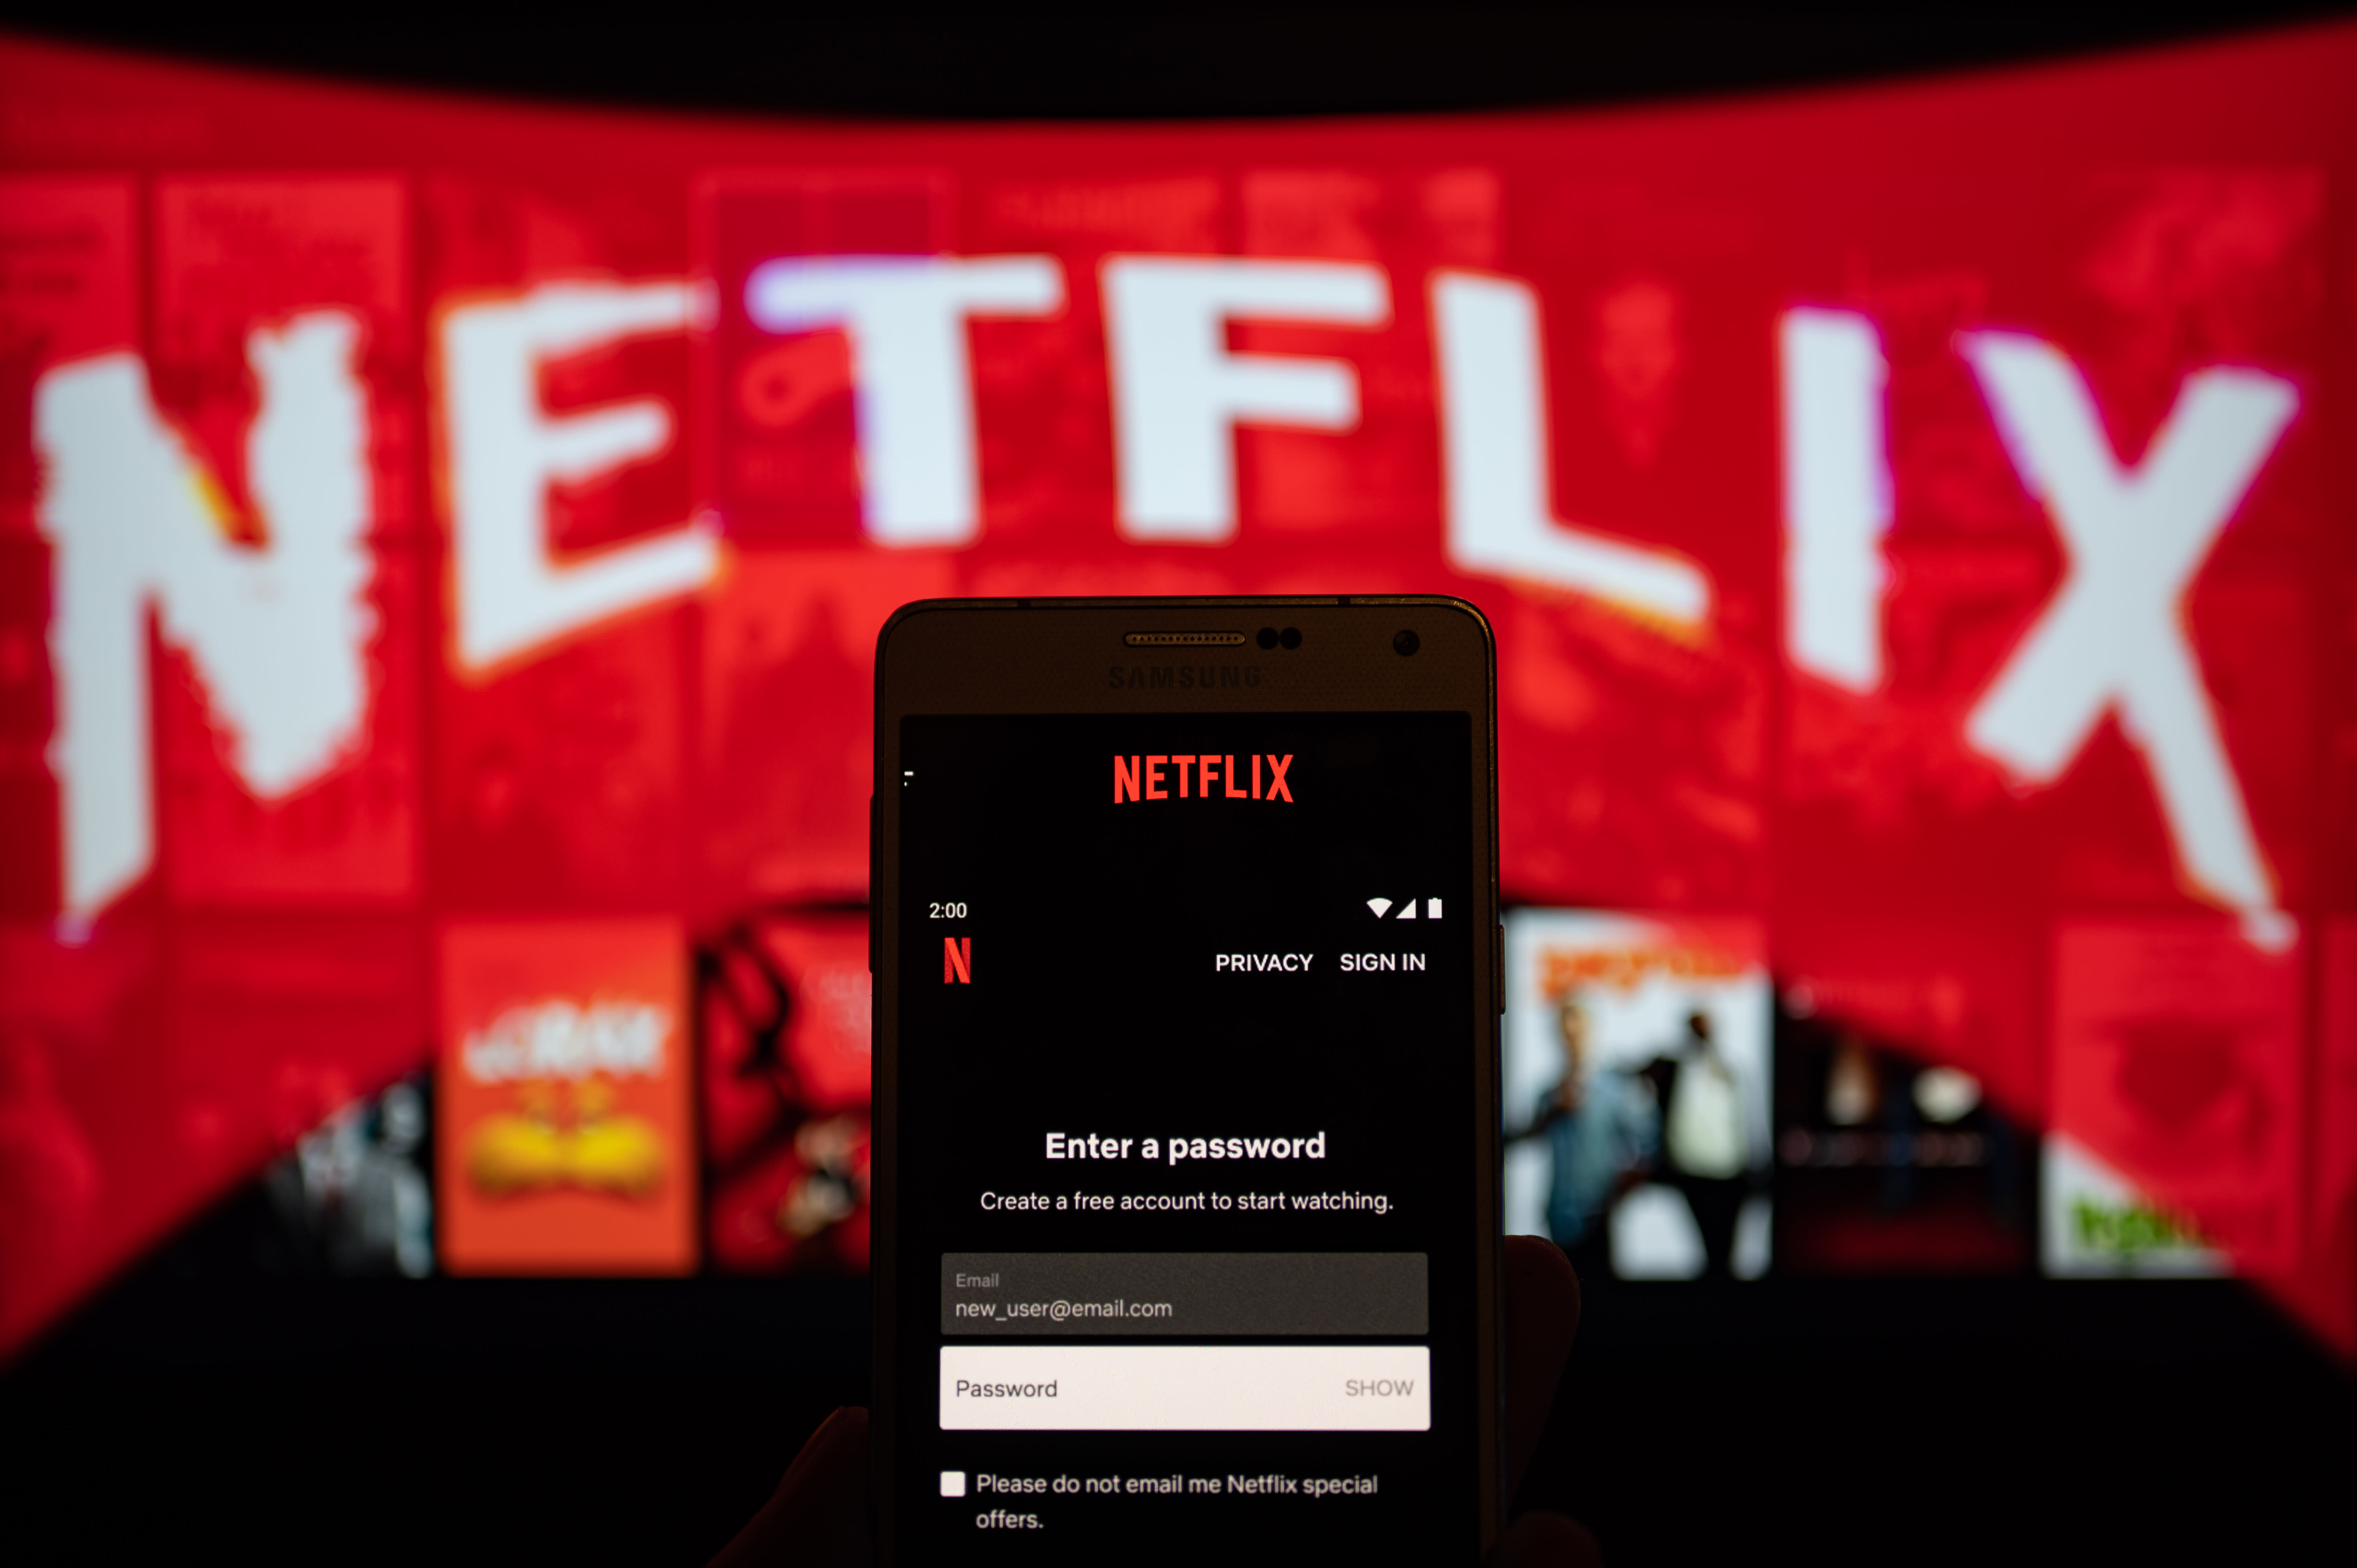 According to Oppenheimer, the US crackdown on password sharing could result in big wins for Netflix